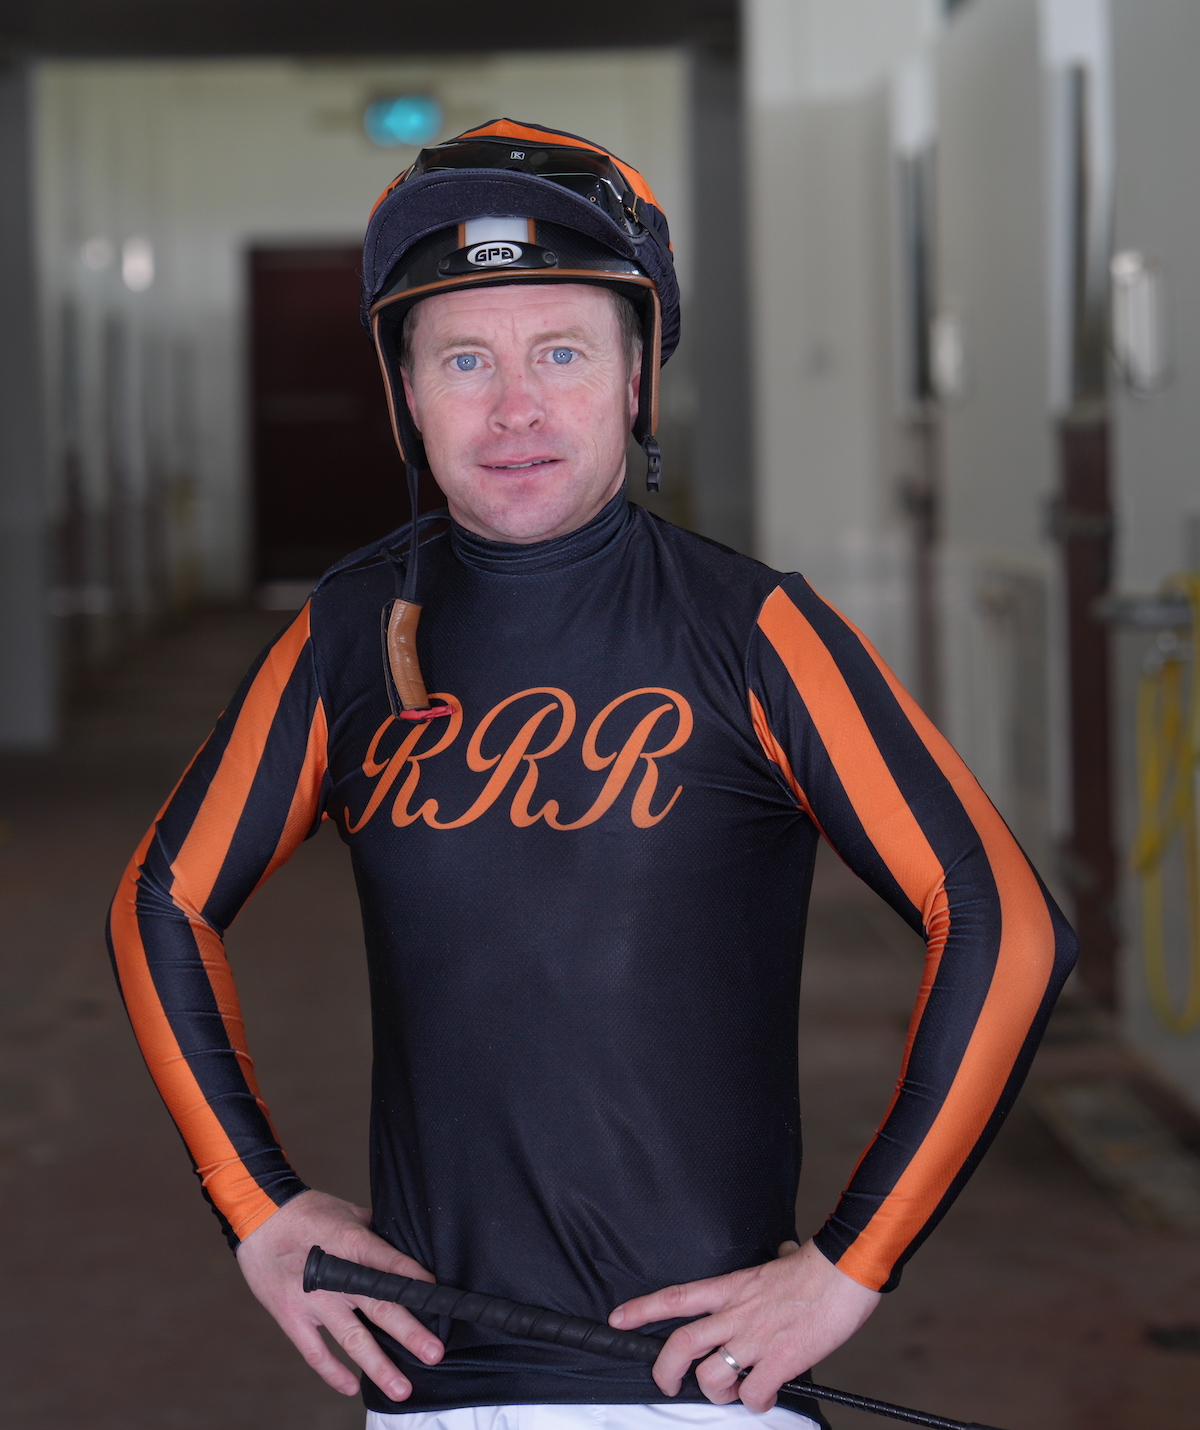 Still hustling: Tadhg O’Shea, the all-time leader in races won in the UAE, is set to ride in Japan later this year. Photo: Dubai Racing Club